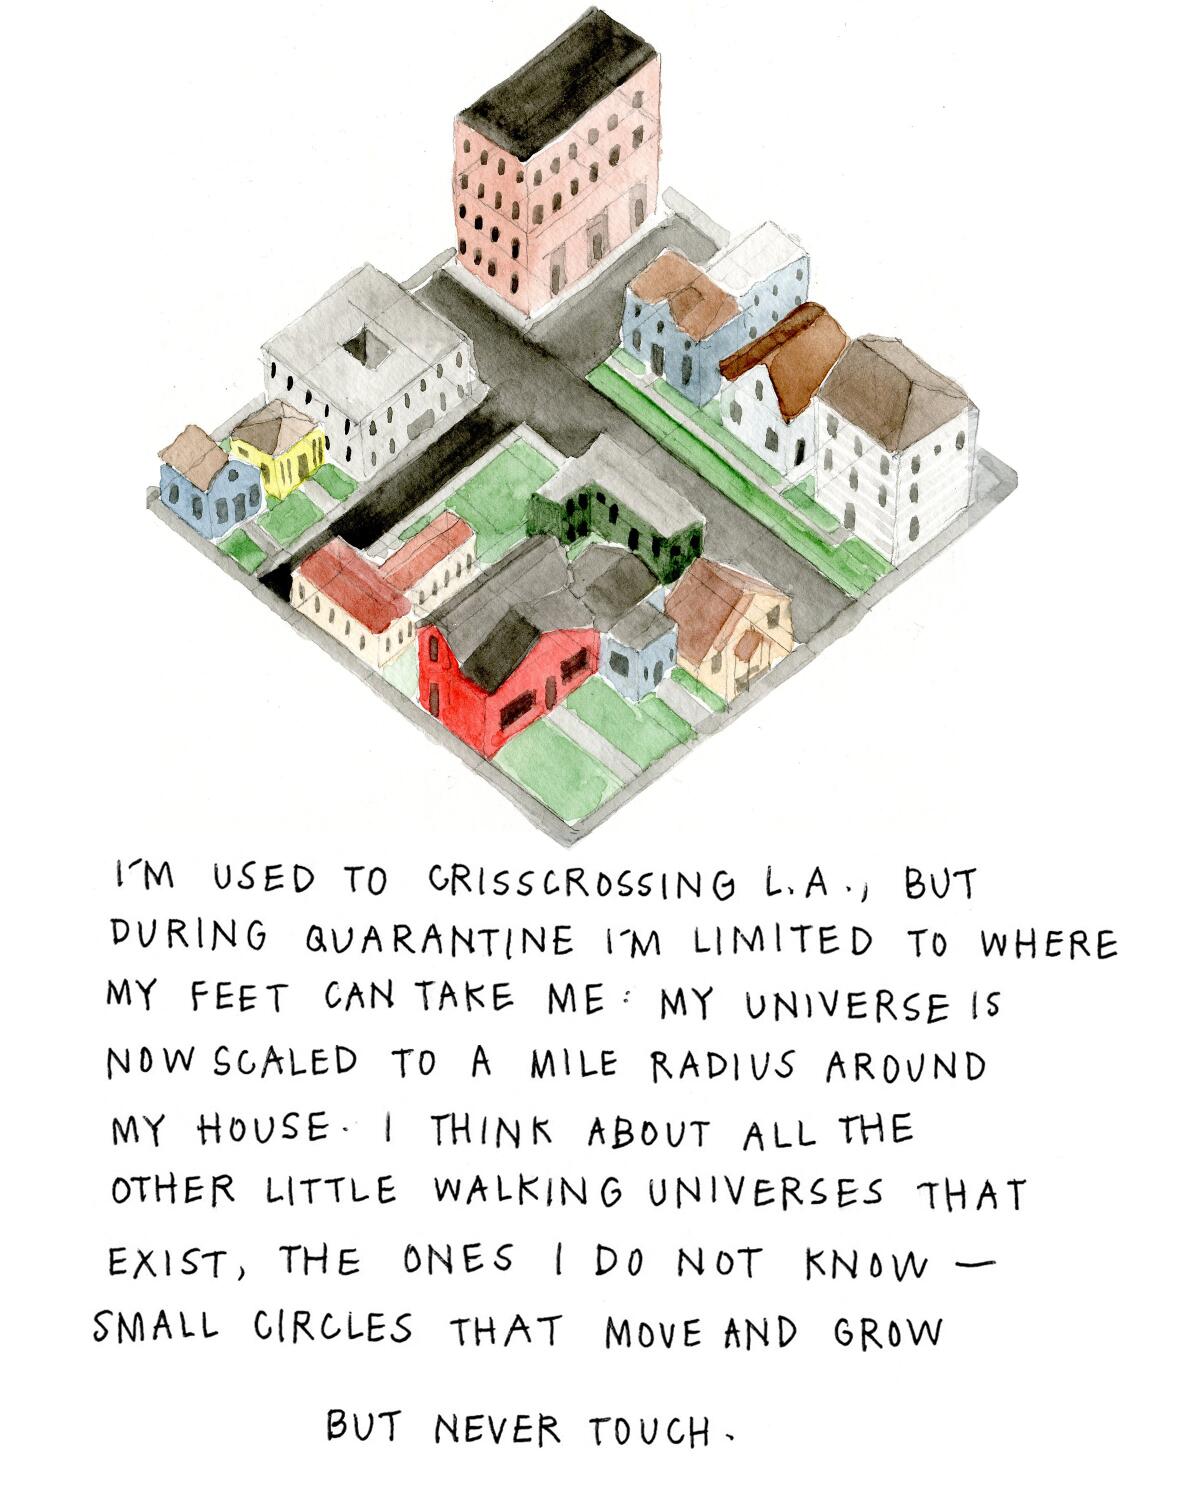 I’m used to crisscrossing L.A., but during quarantine I’m limited to where my feet can take me: My universe is now scaled to a mile radius around my house. I think about all other little walking universes that exist, the ones I do not know — small circles that move and grow but never touch. 